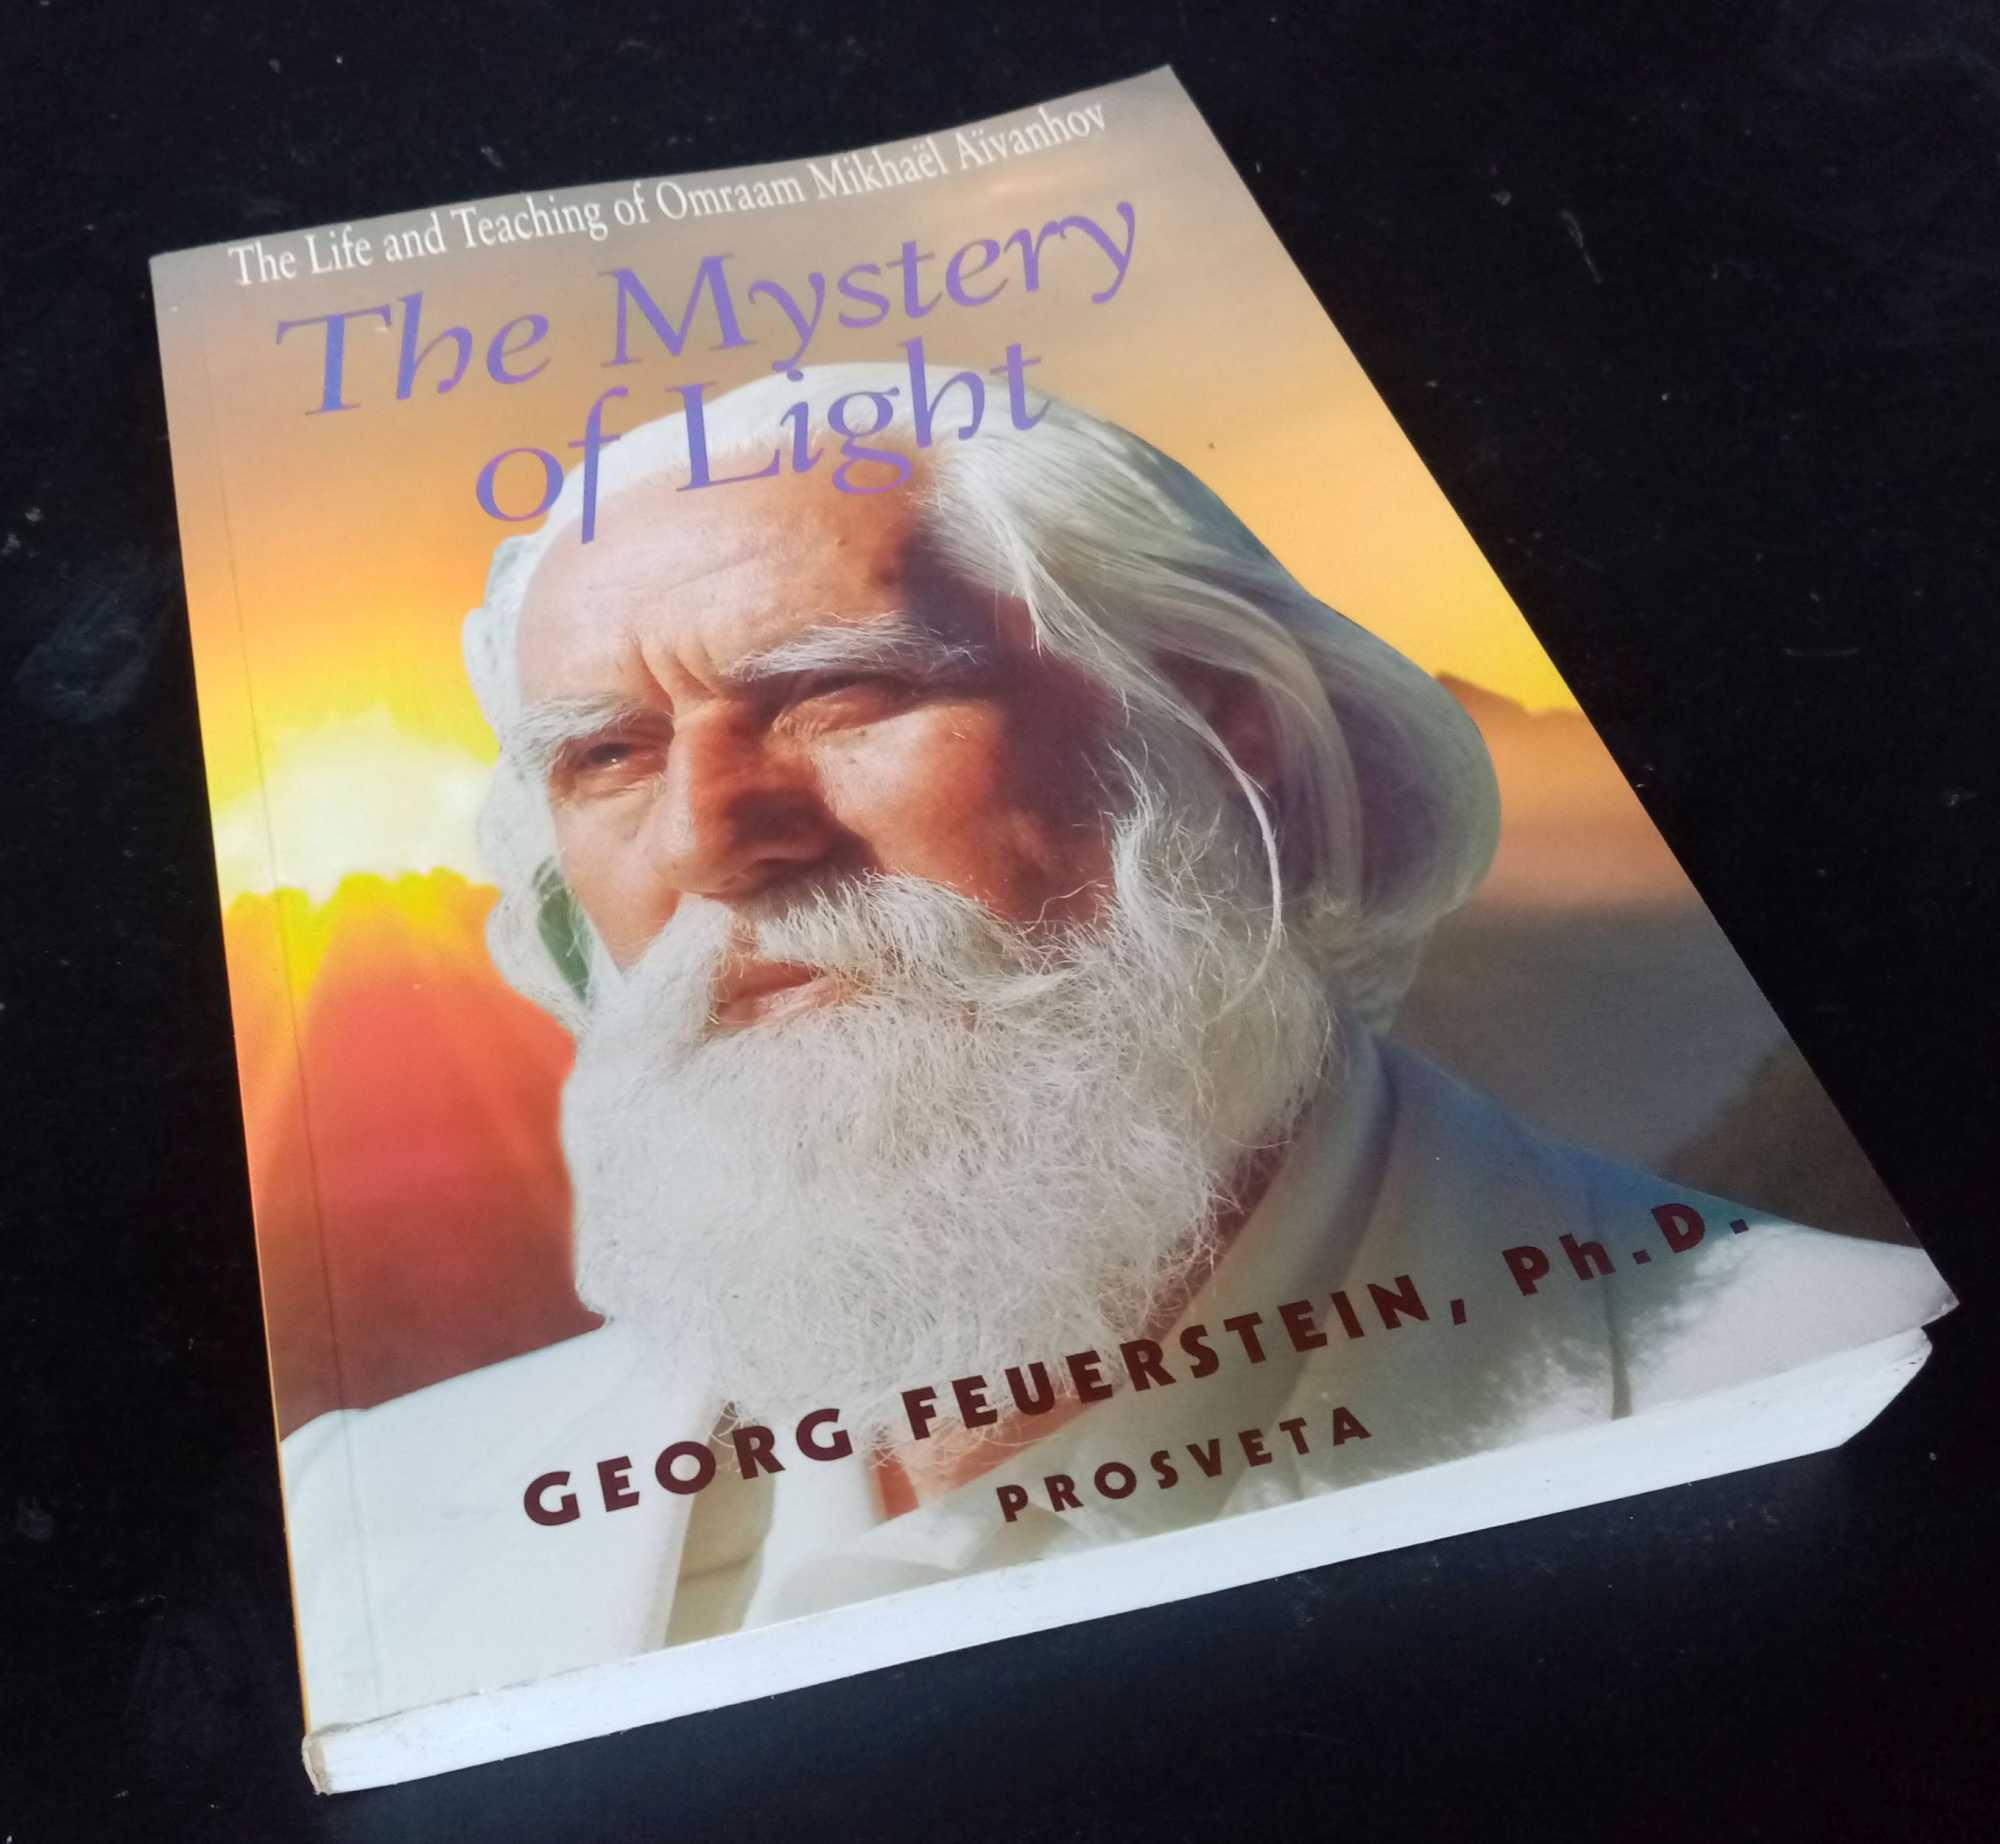 Georg Fuerstein - The Mystery of Light. The Life and Teaching ofOmraam Mikhael Aivanhov